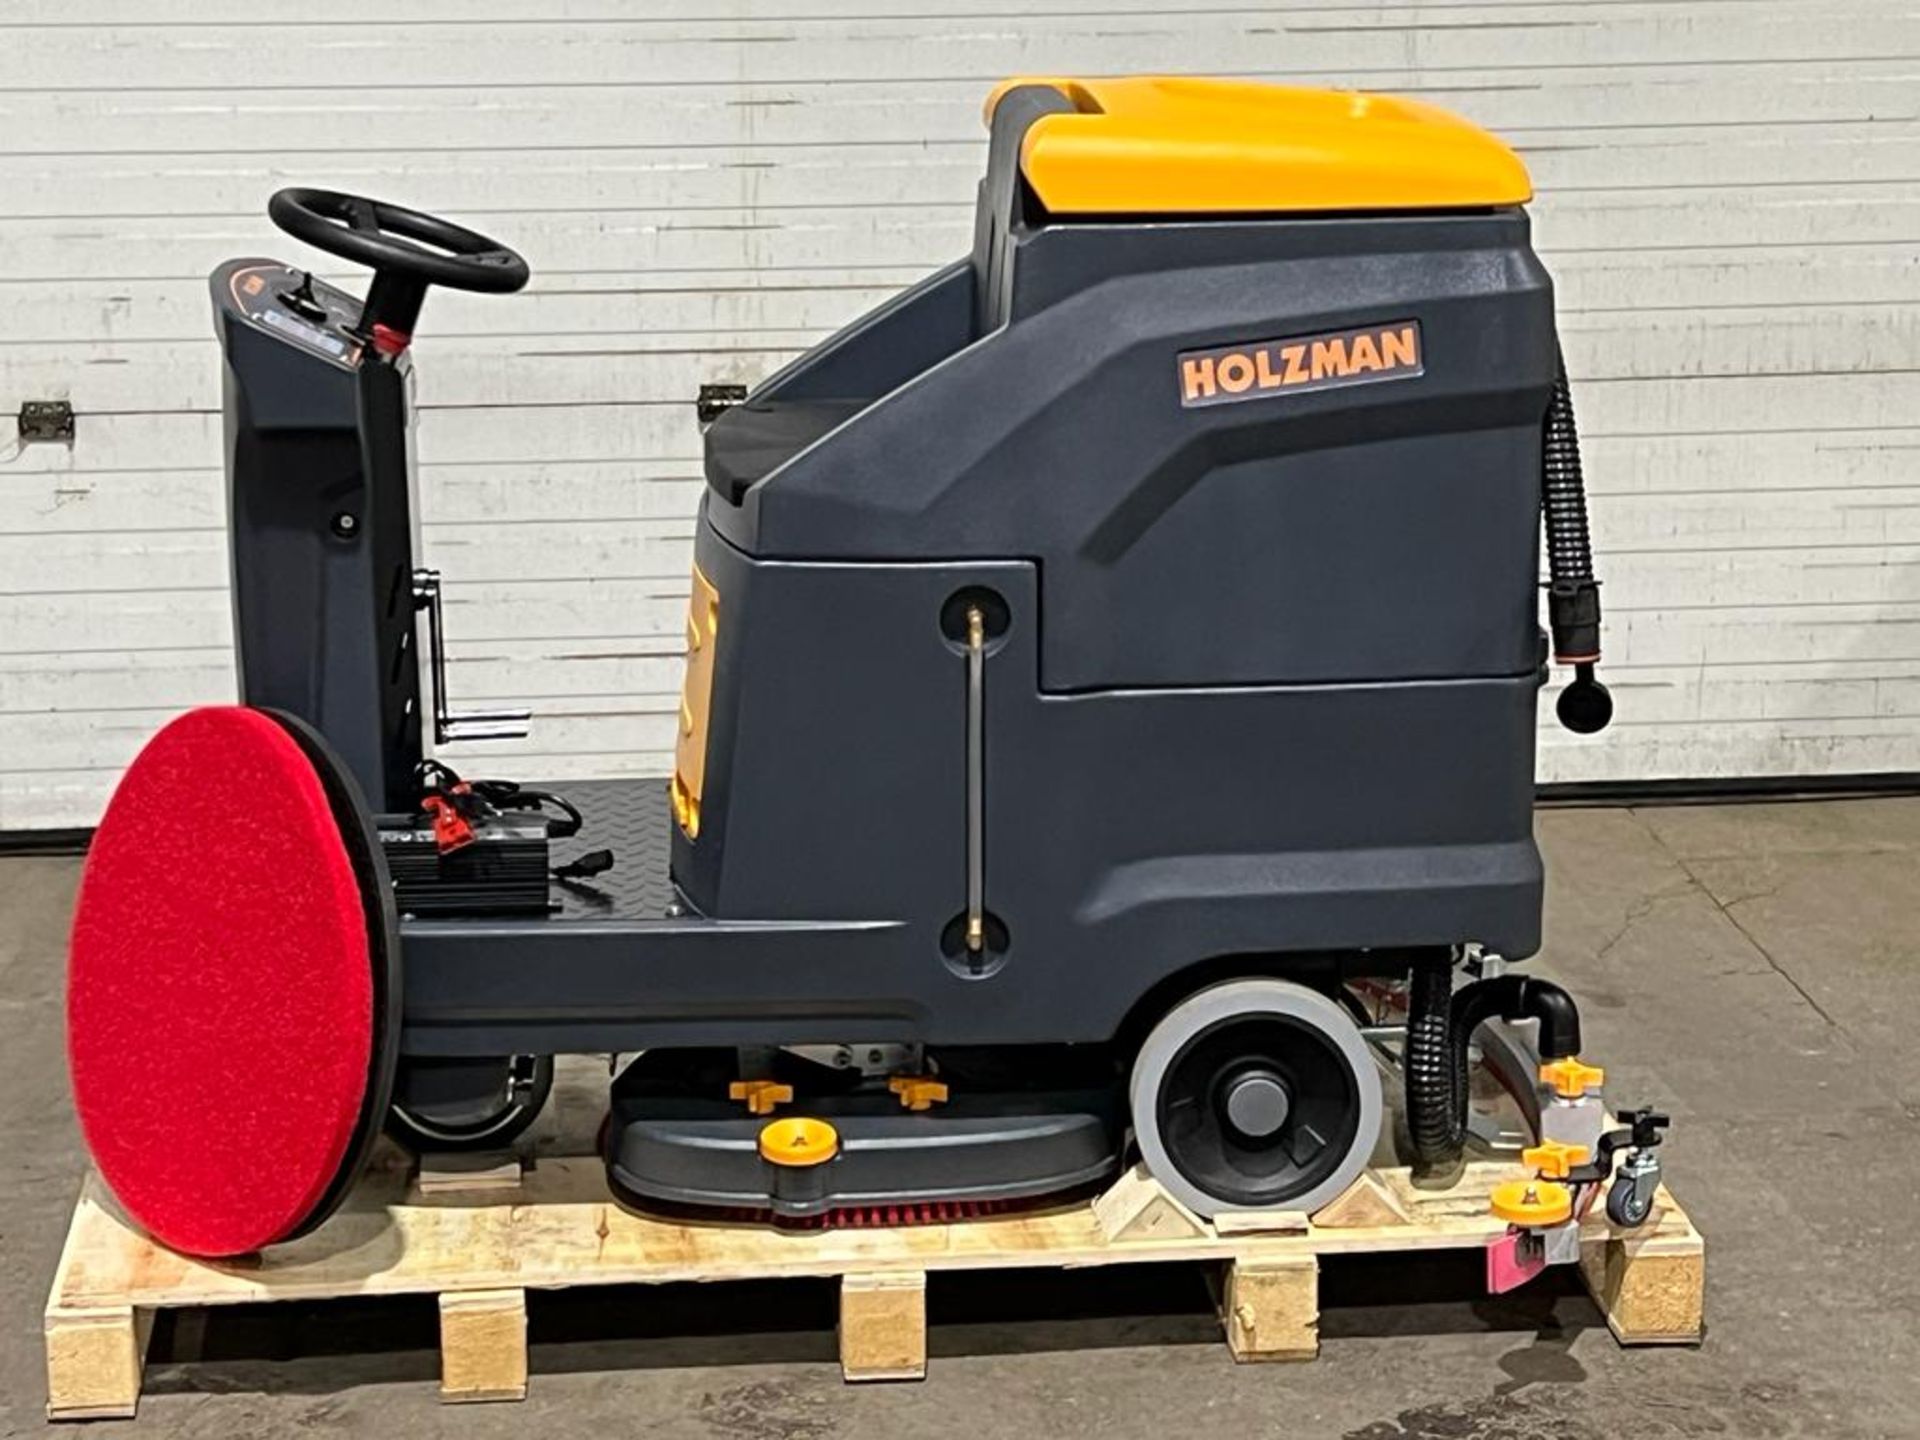 Holzman MINT RIDE ON Floor Sweeper Scrubber Unit model K70 - BRAND NEW with extra pads, digital - Image 3 of 6